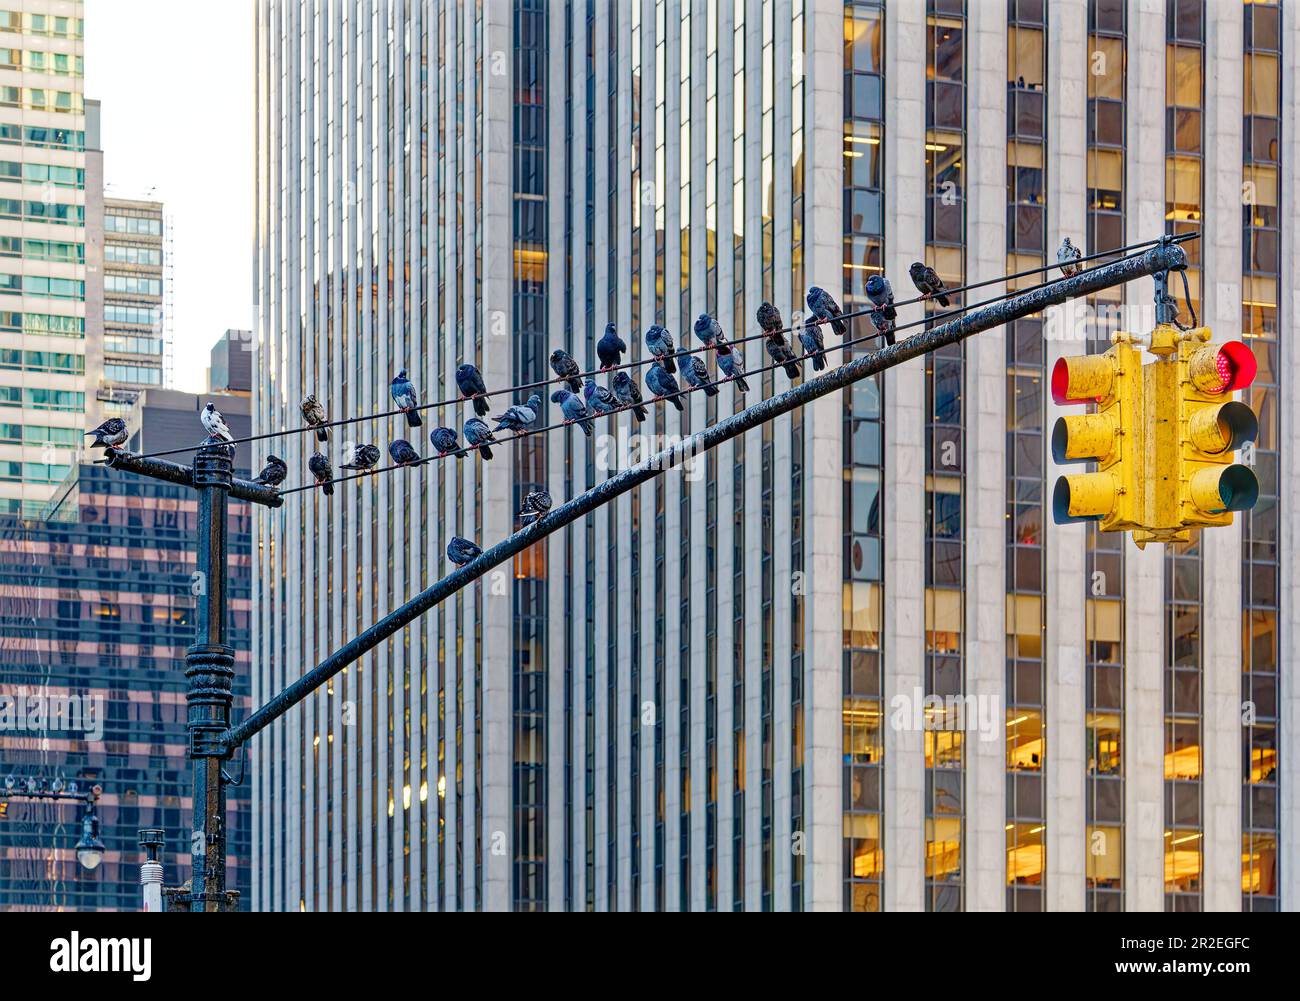 The pigeons seem to be waiting for a green light, with the General Motors Building as their backdrop. Stock Photo